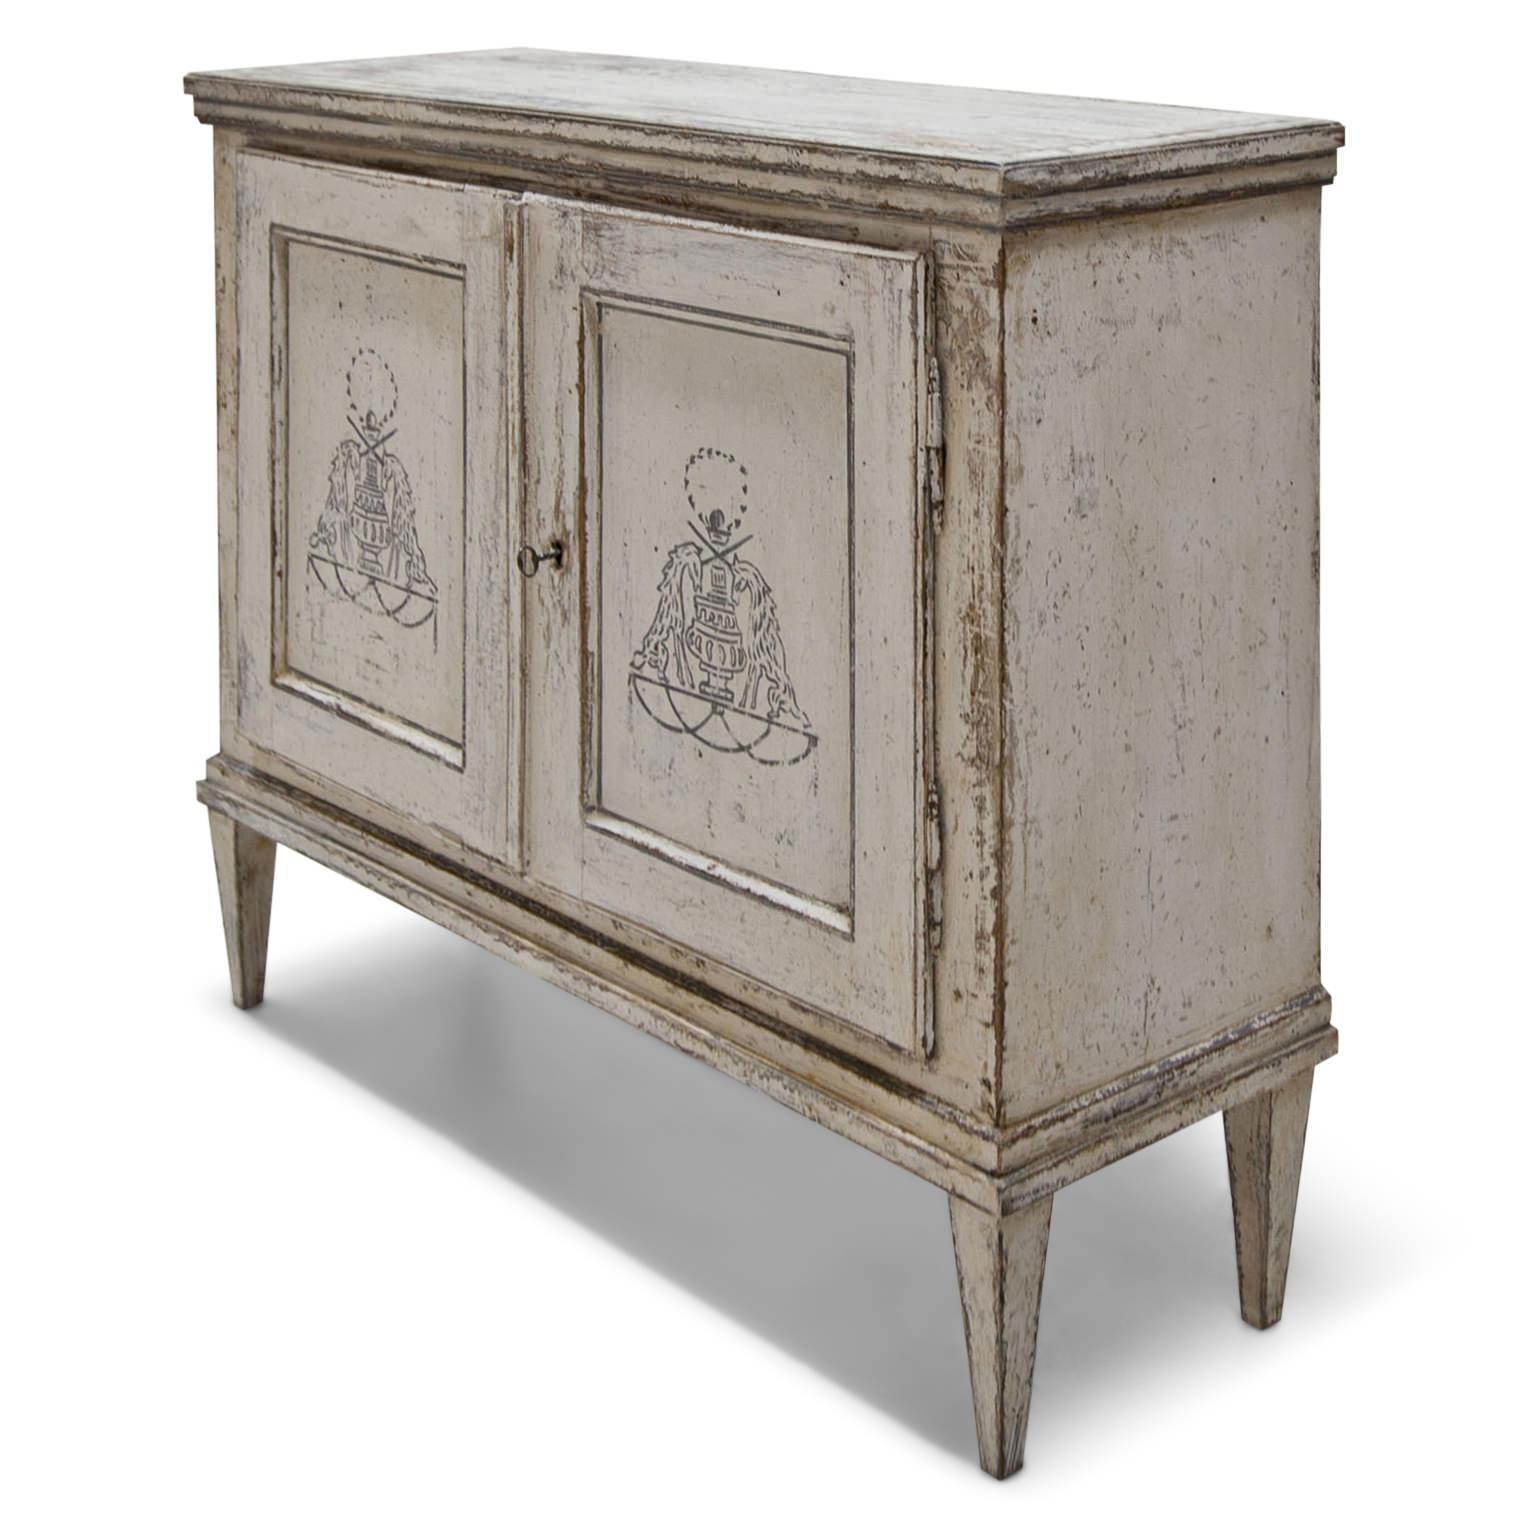 Hand-painted cabinet standing on tapered feet with two doors and profiled edges. The Gustavian-style crème-colored paint is new and has an aged patina. The fillings on the doors show designs of unicorns and amphora.